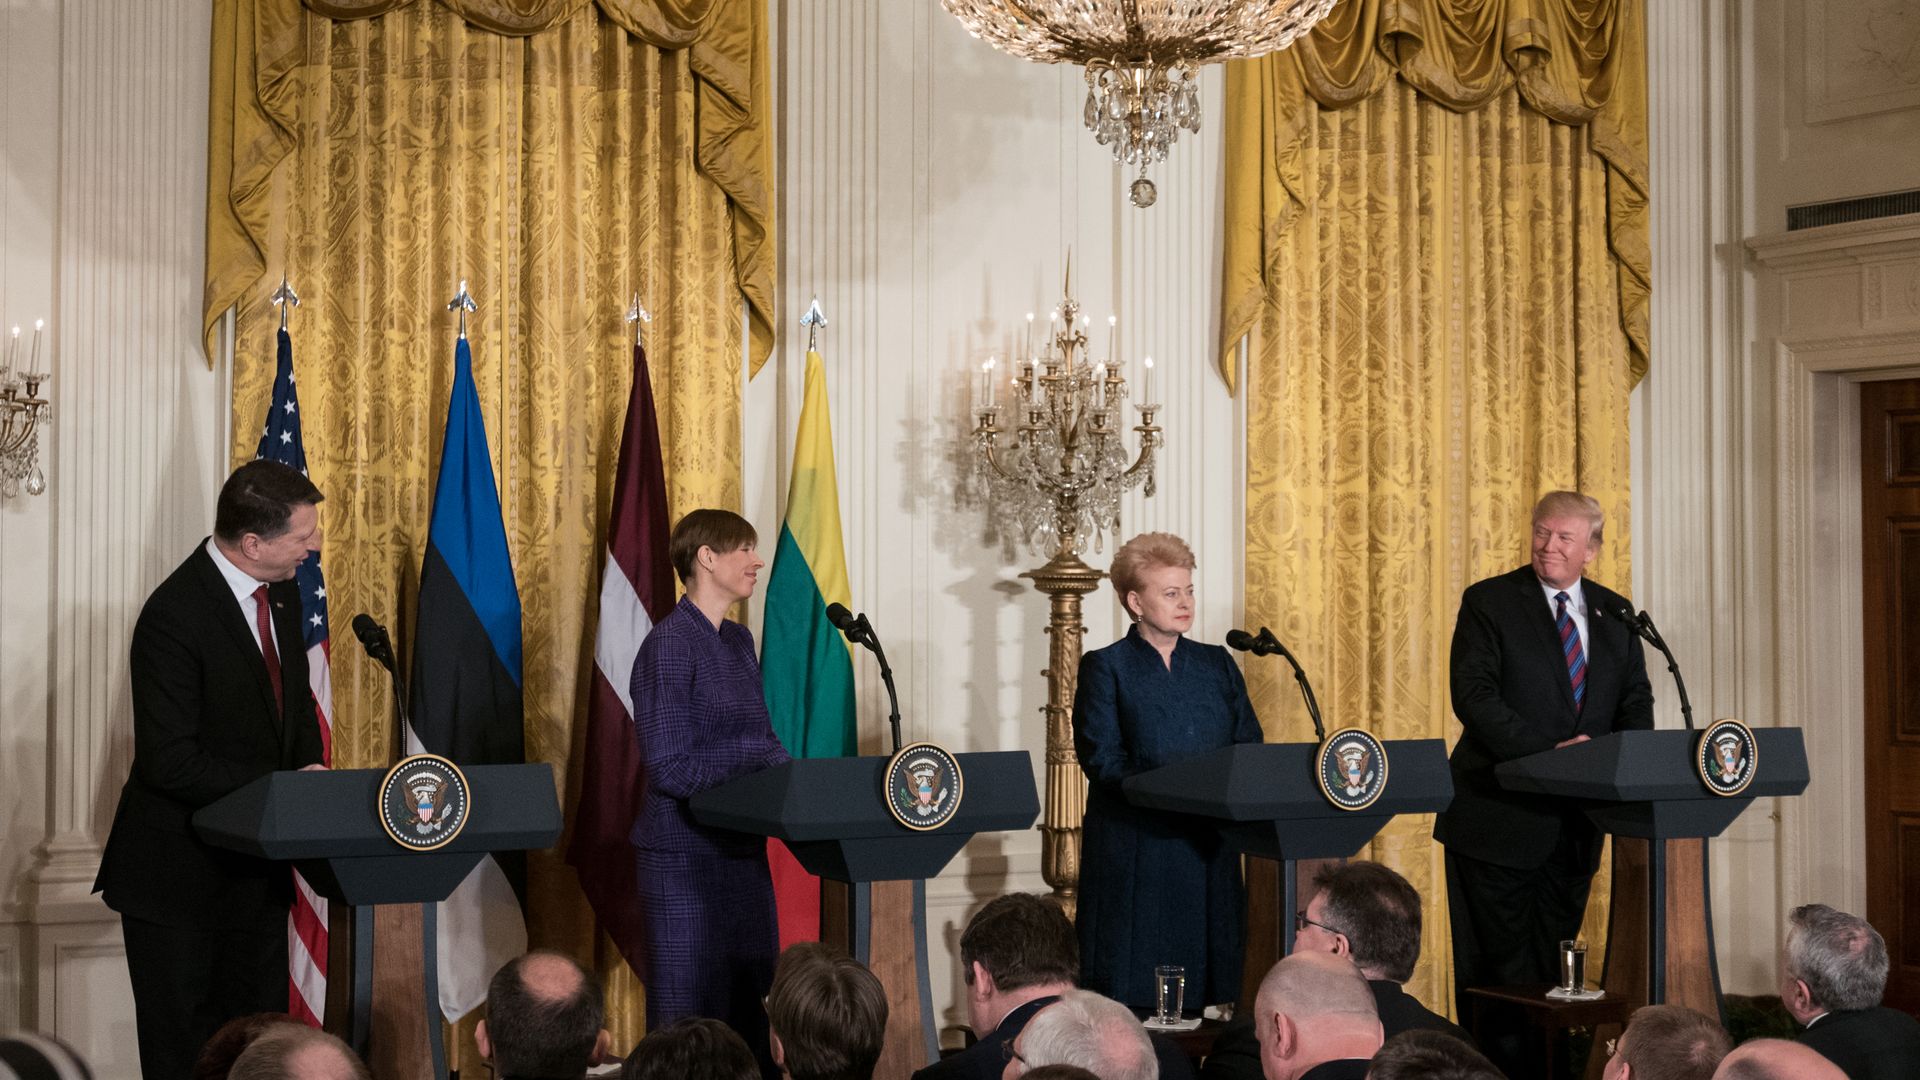 President Trump meets the Baltic heads of state during a summit at the White House on April 3, 2018.